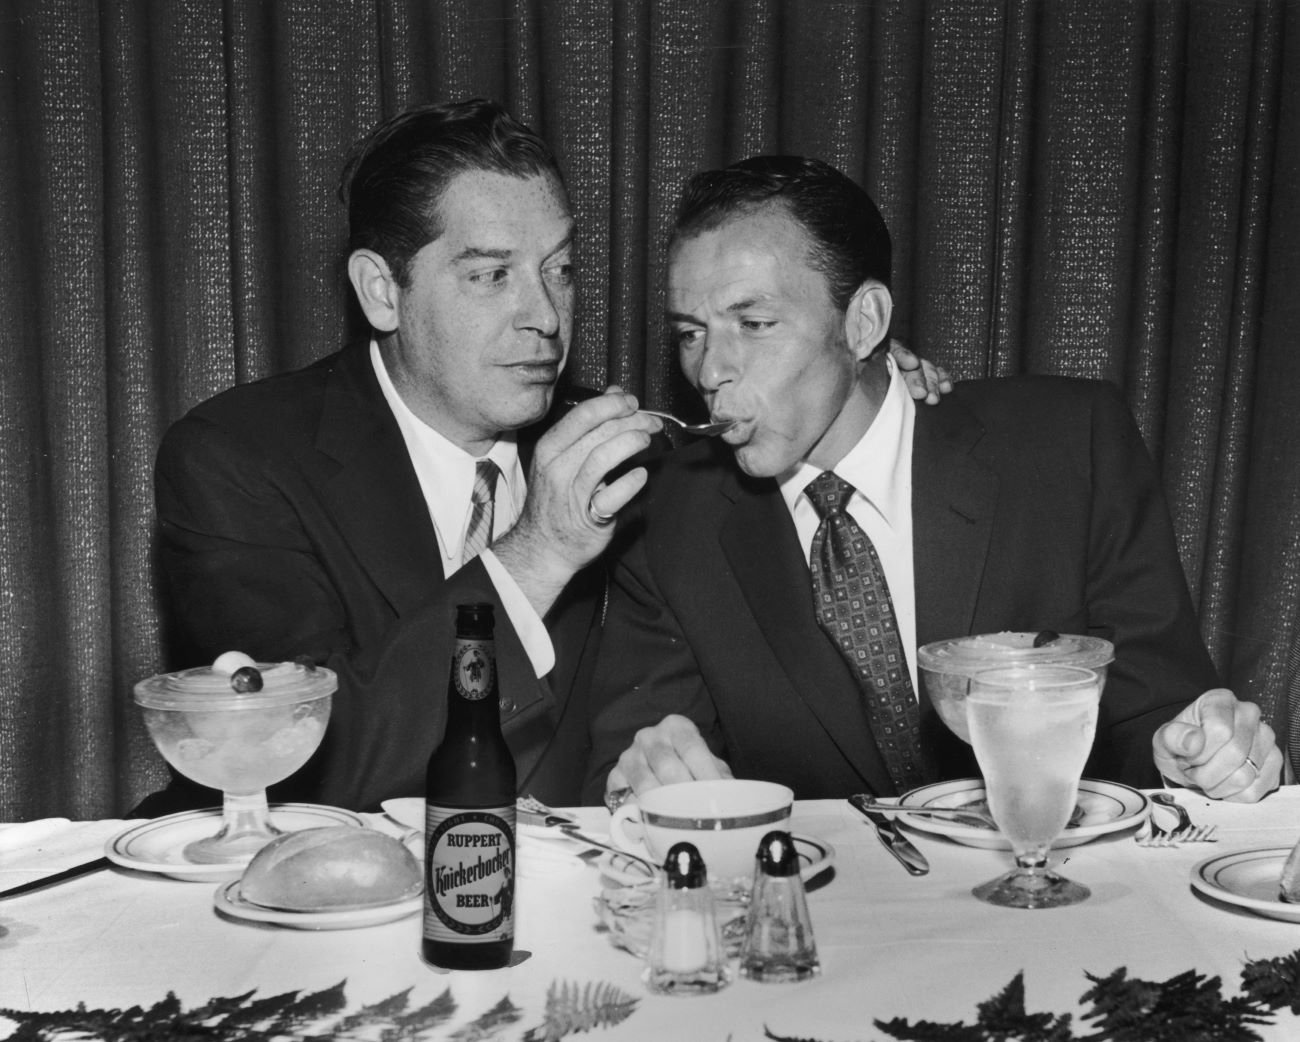 Comedian Milton Berle feeds Frank Sinatra a spoonful of fruit at a restaurant.